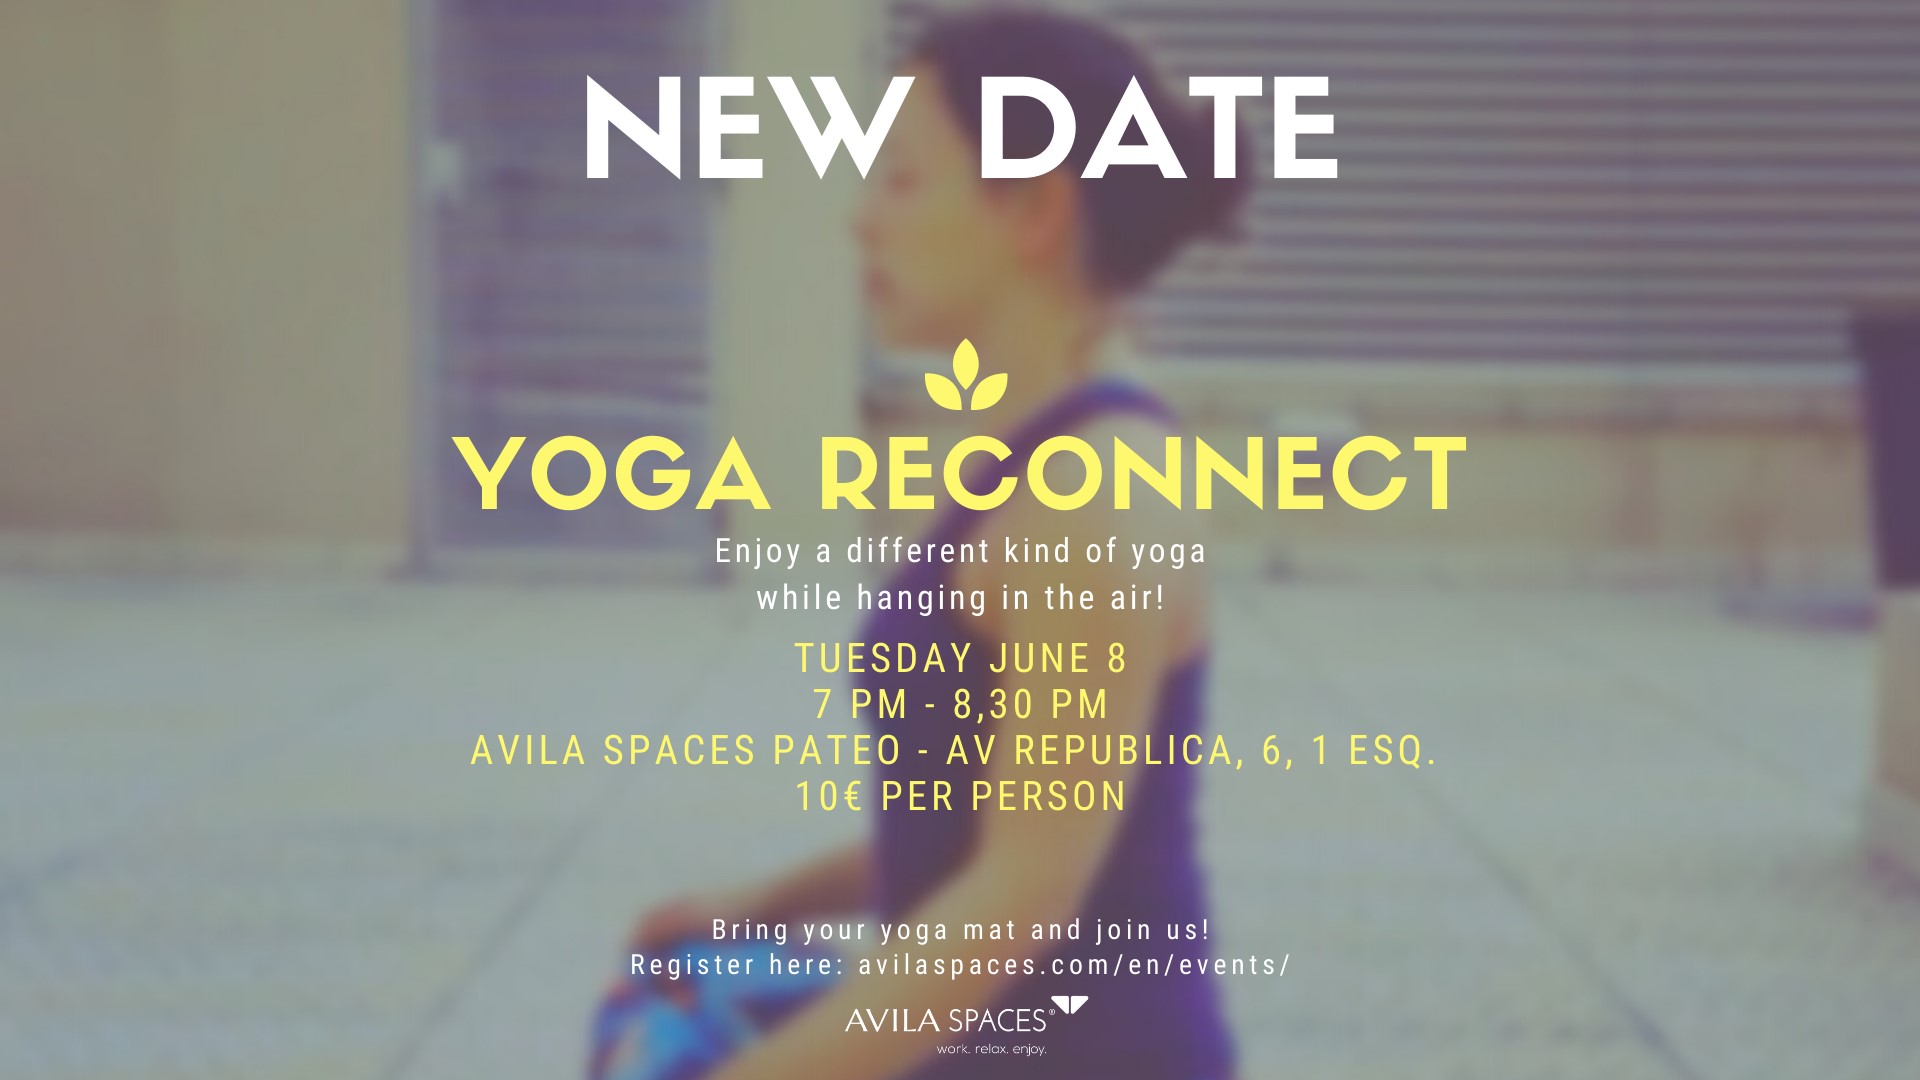 NOVA DATA (DIA 08/06/2021) - Let´s Reconnect with Yoga in the Pateo